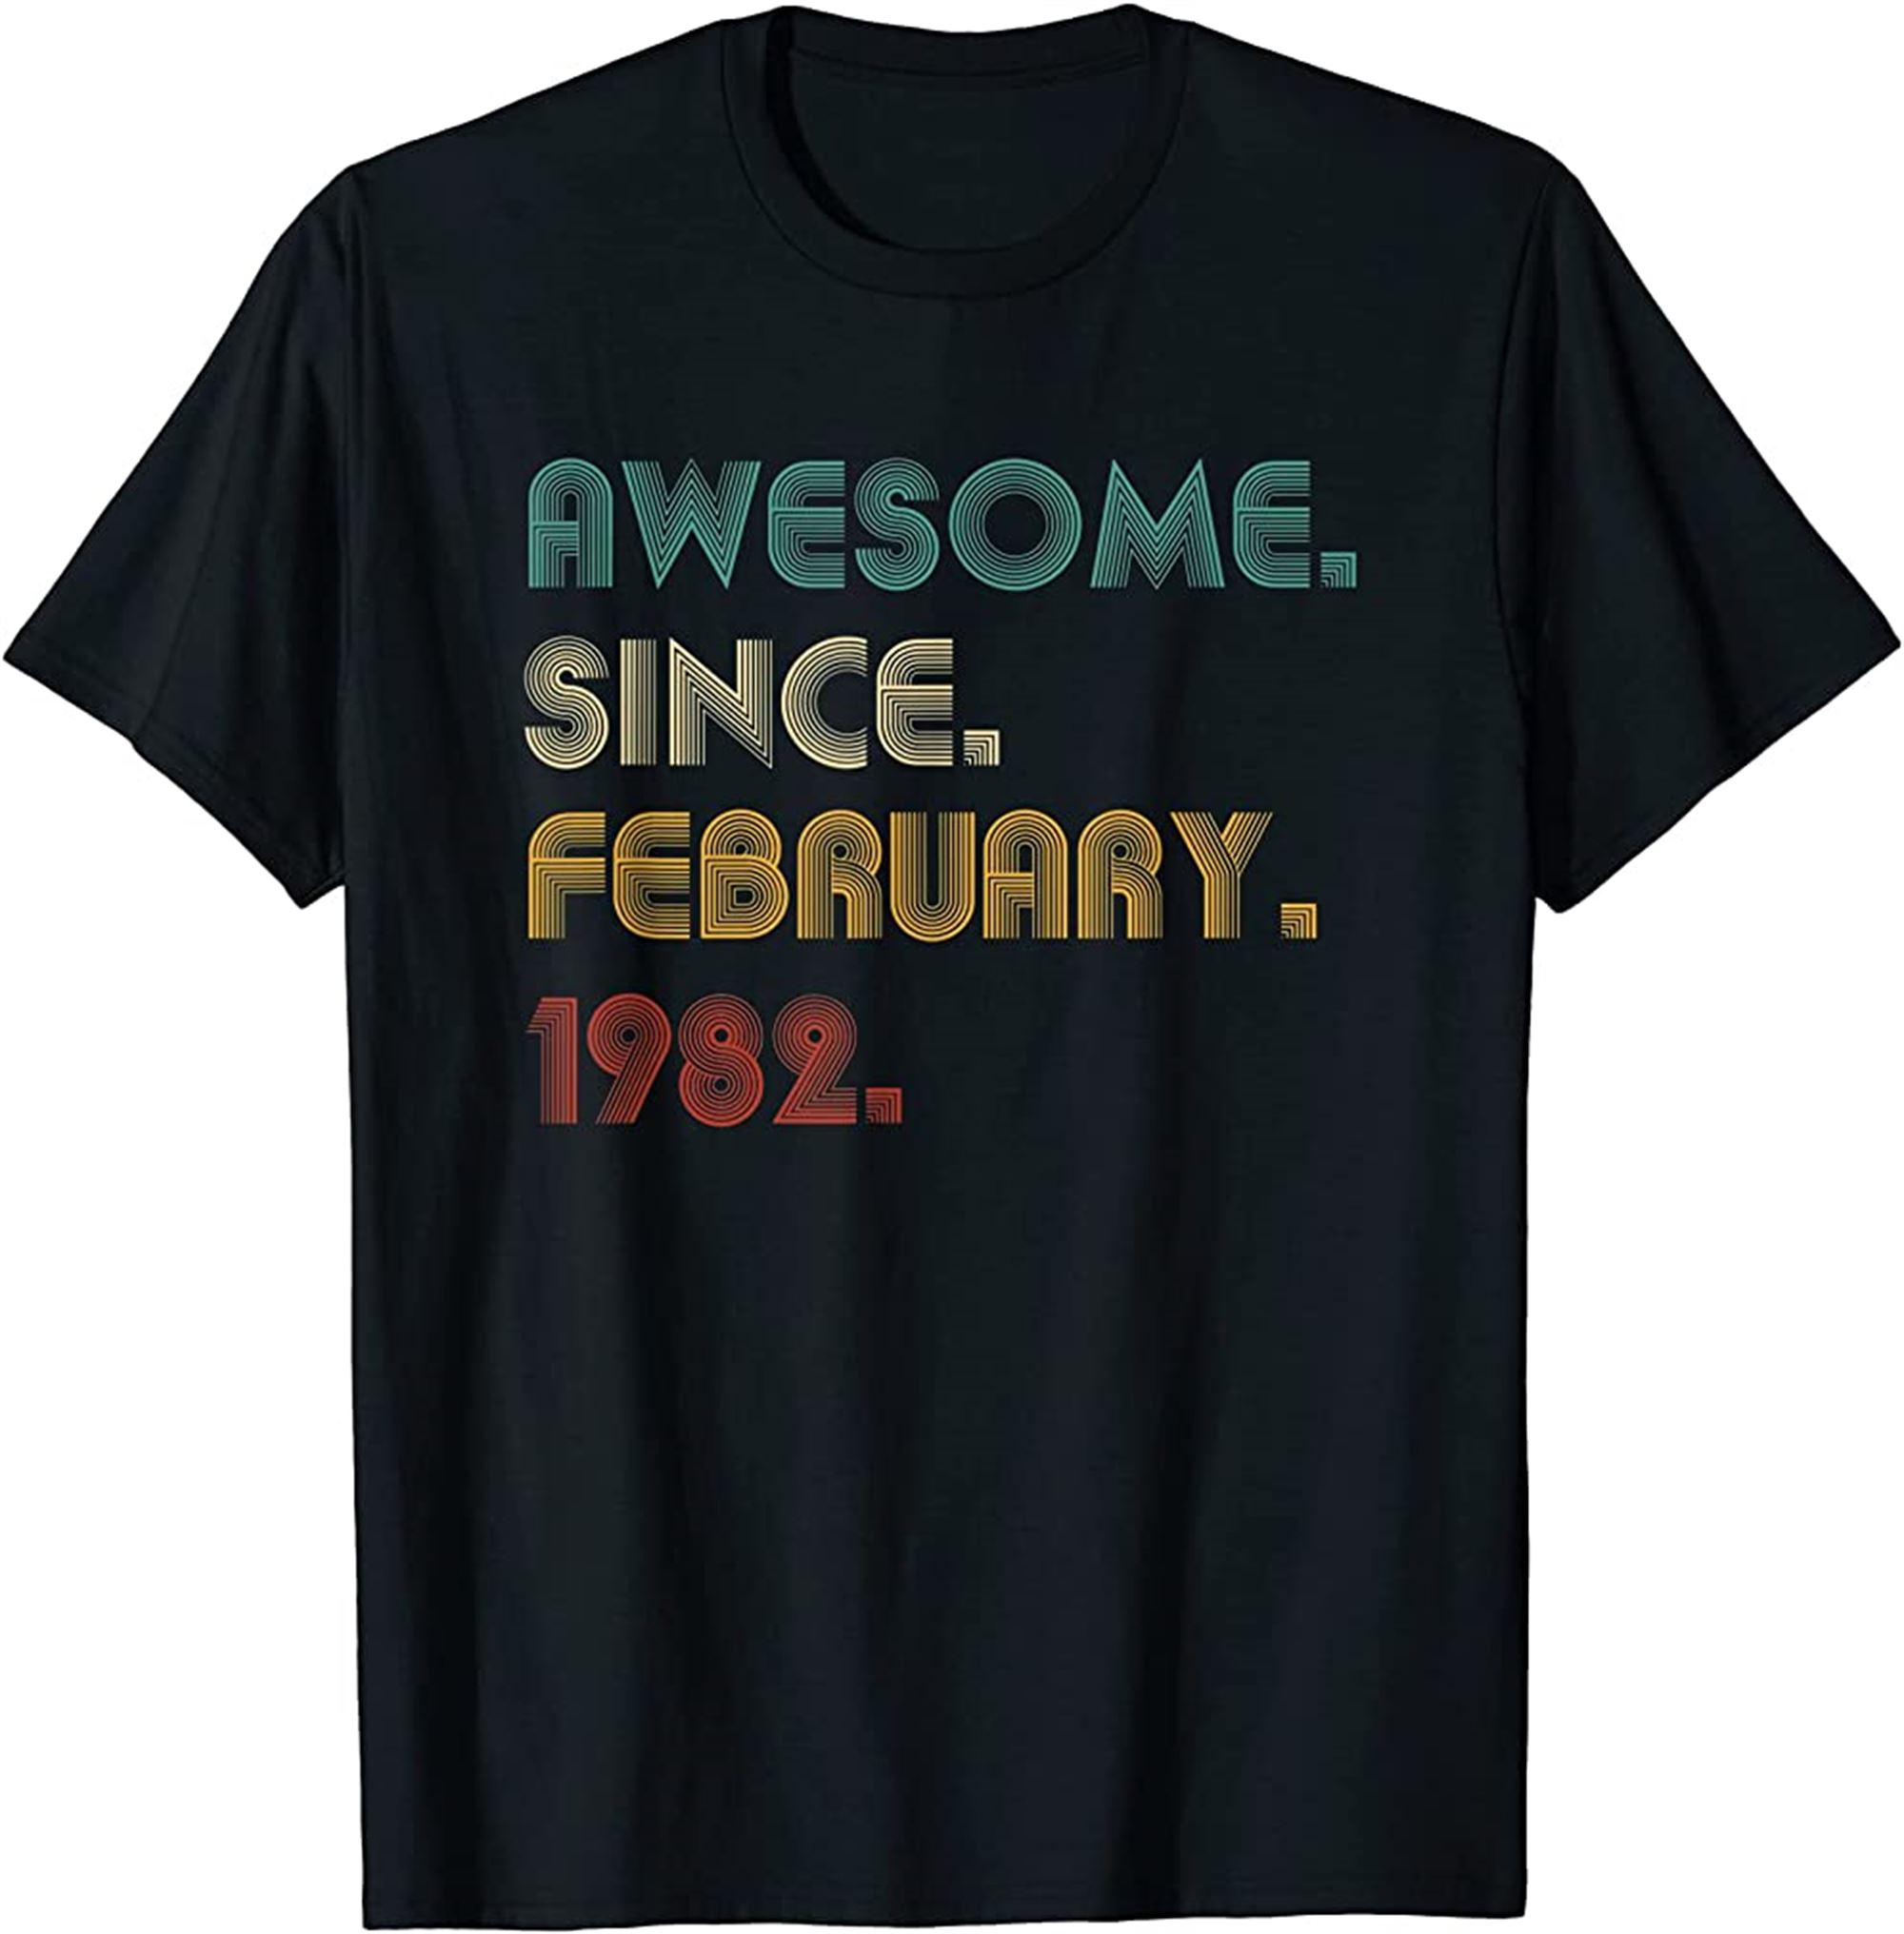 40 Year Old Awesome Since February 1982 Gifts 41th Birthday T-shirt Full Size Up To 5xl